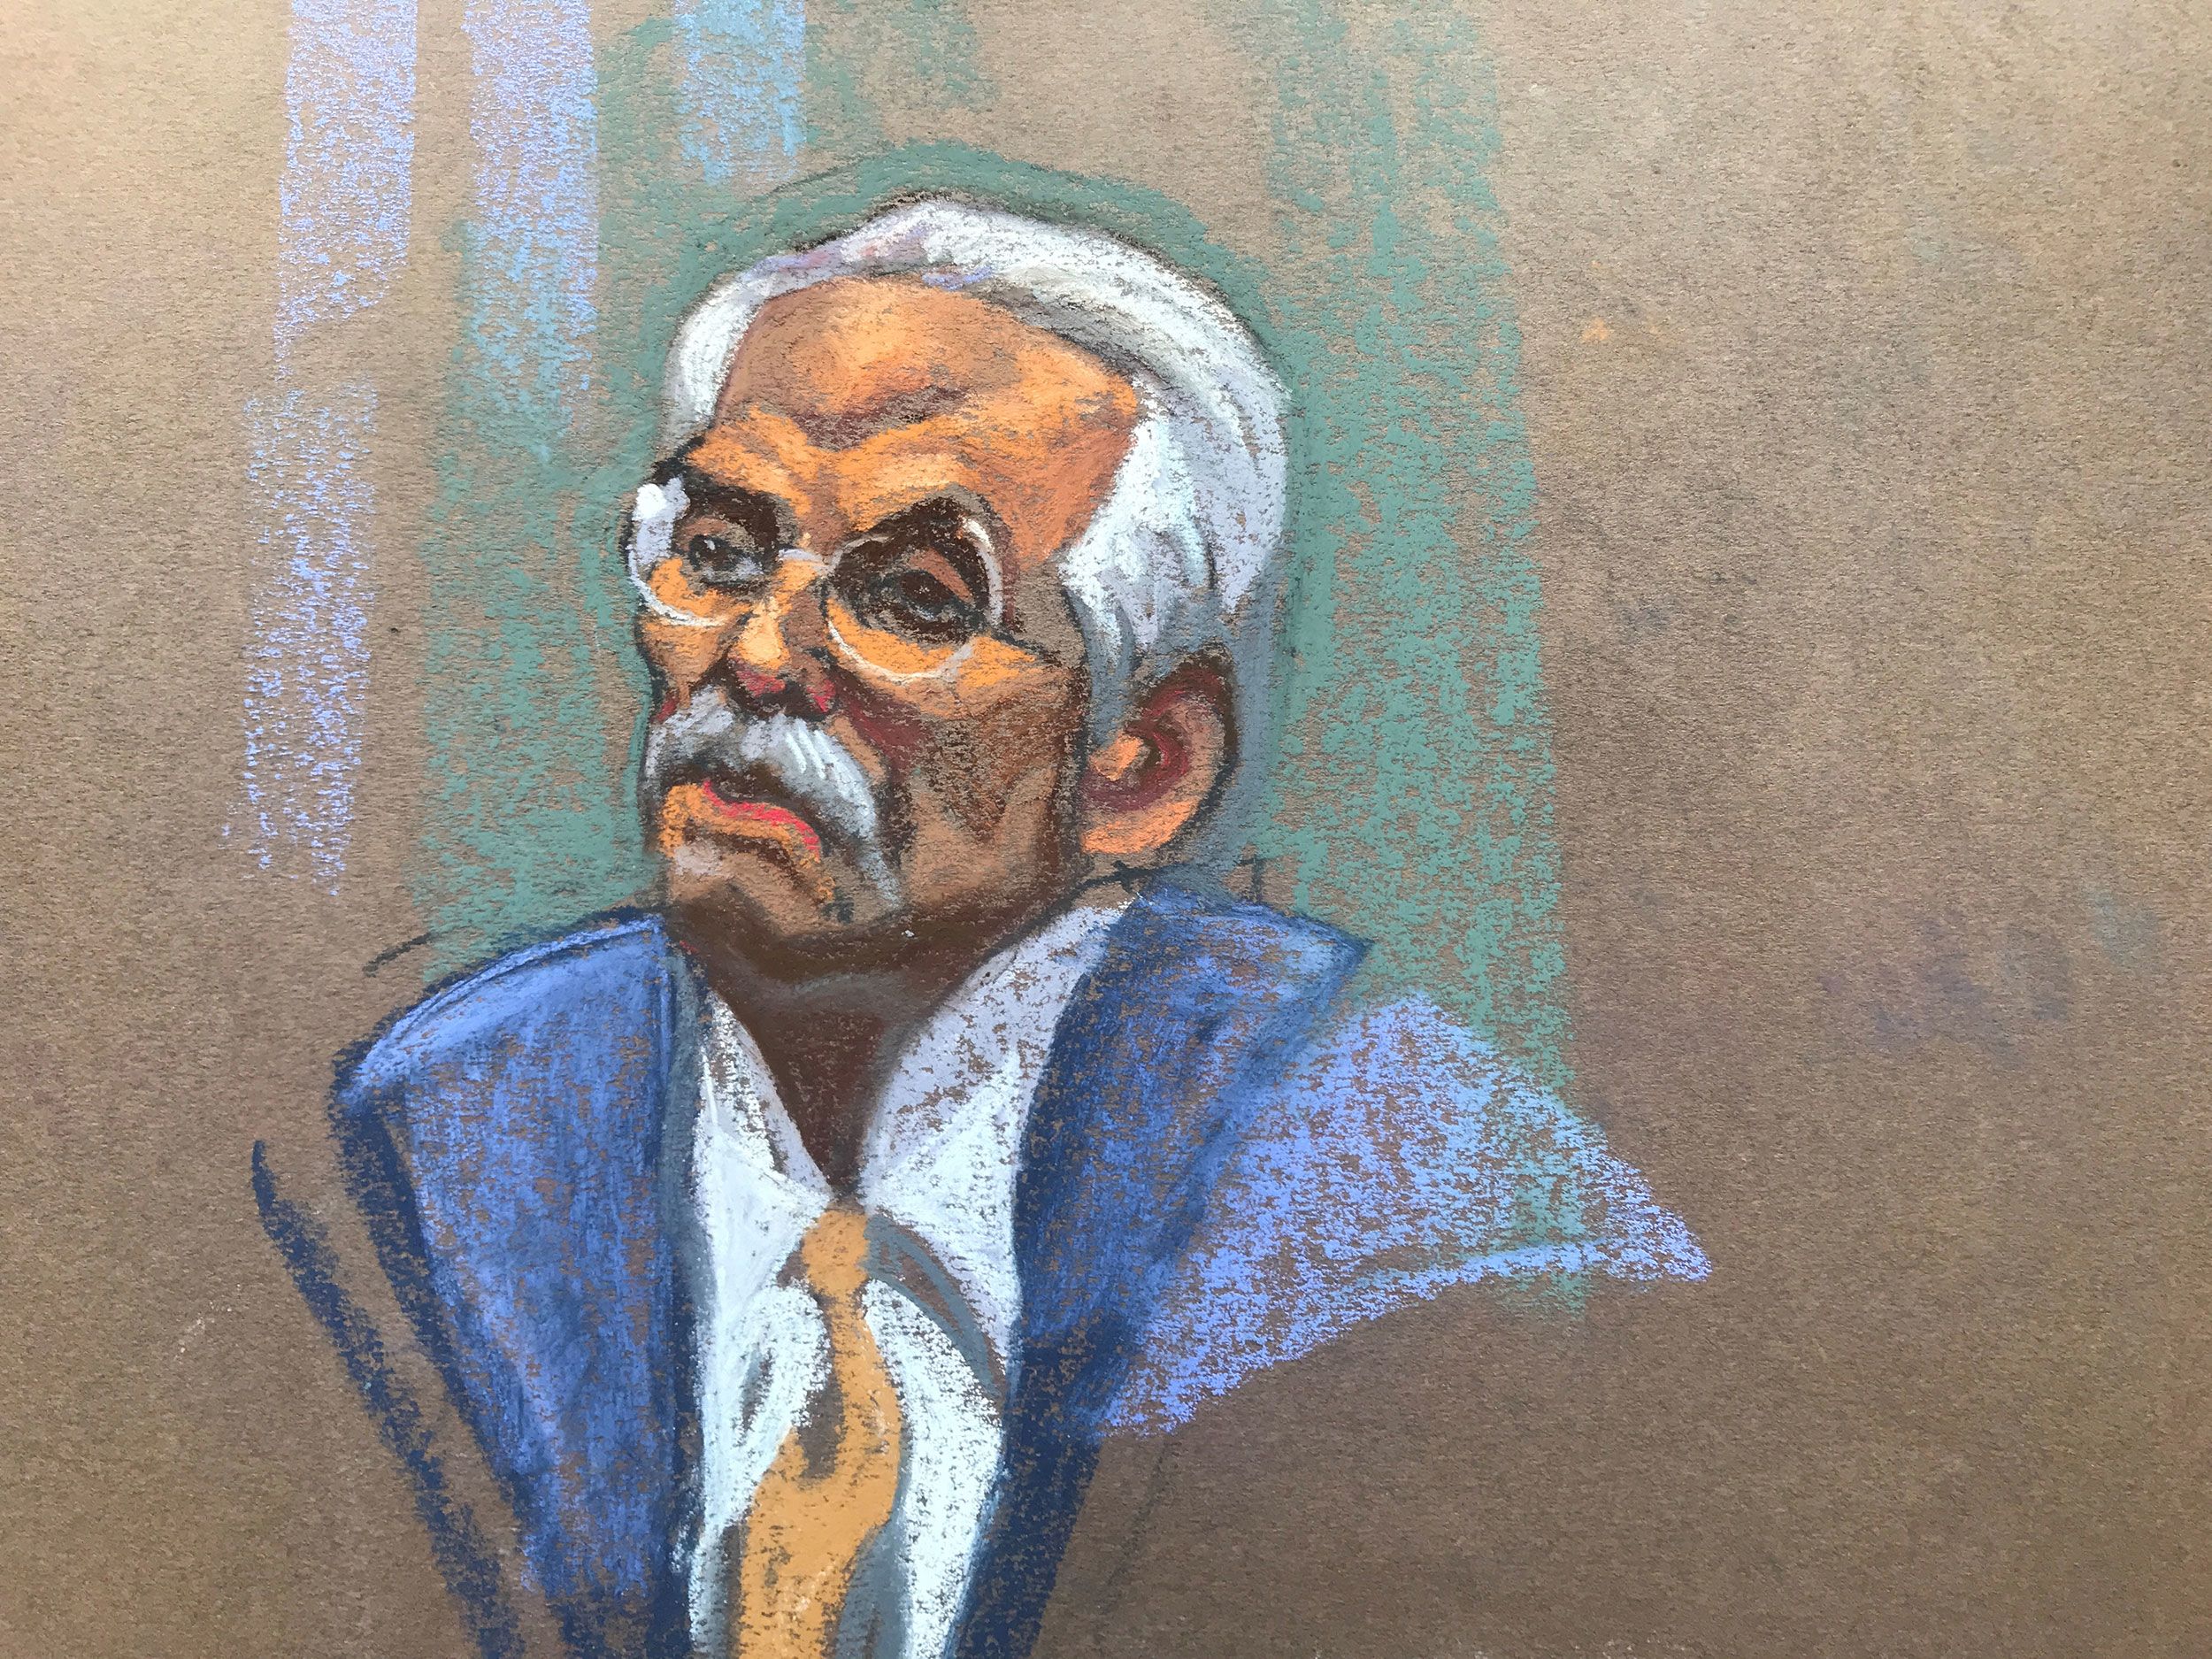 Court sketch of David Pecker, the former chairman of the National Enquirer’s parent company, American Media Inc. Pecker testified in Day 5 of former President Donald Trump’s criminal hush money trial taking place in criminal court in New York City on April 22, 2024.